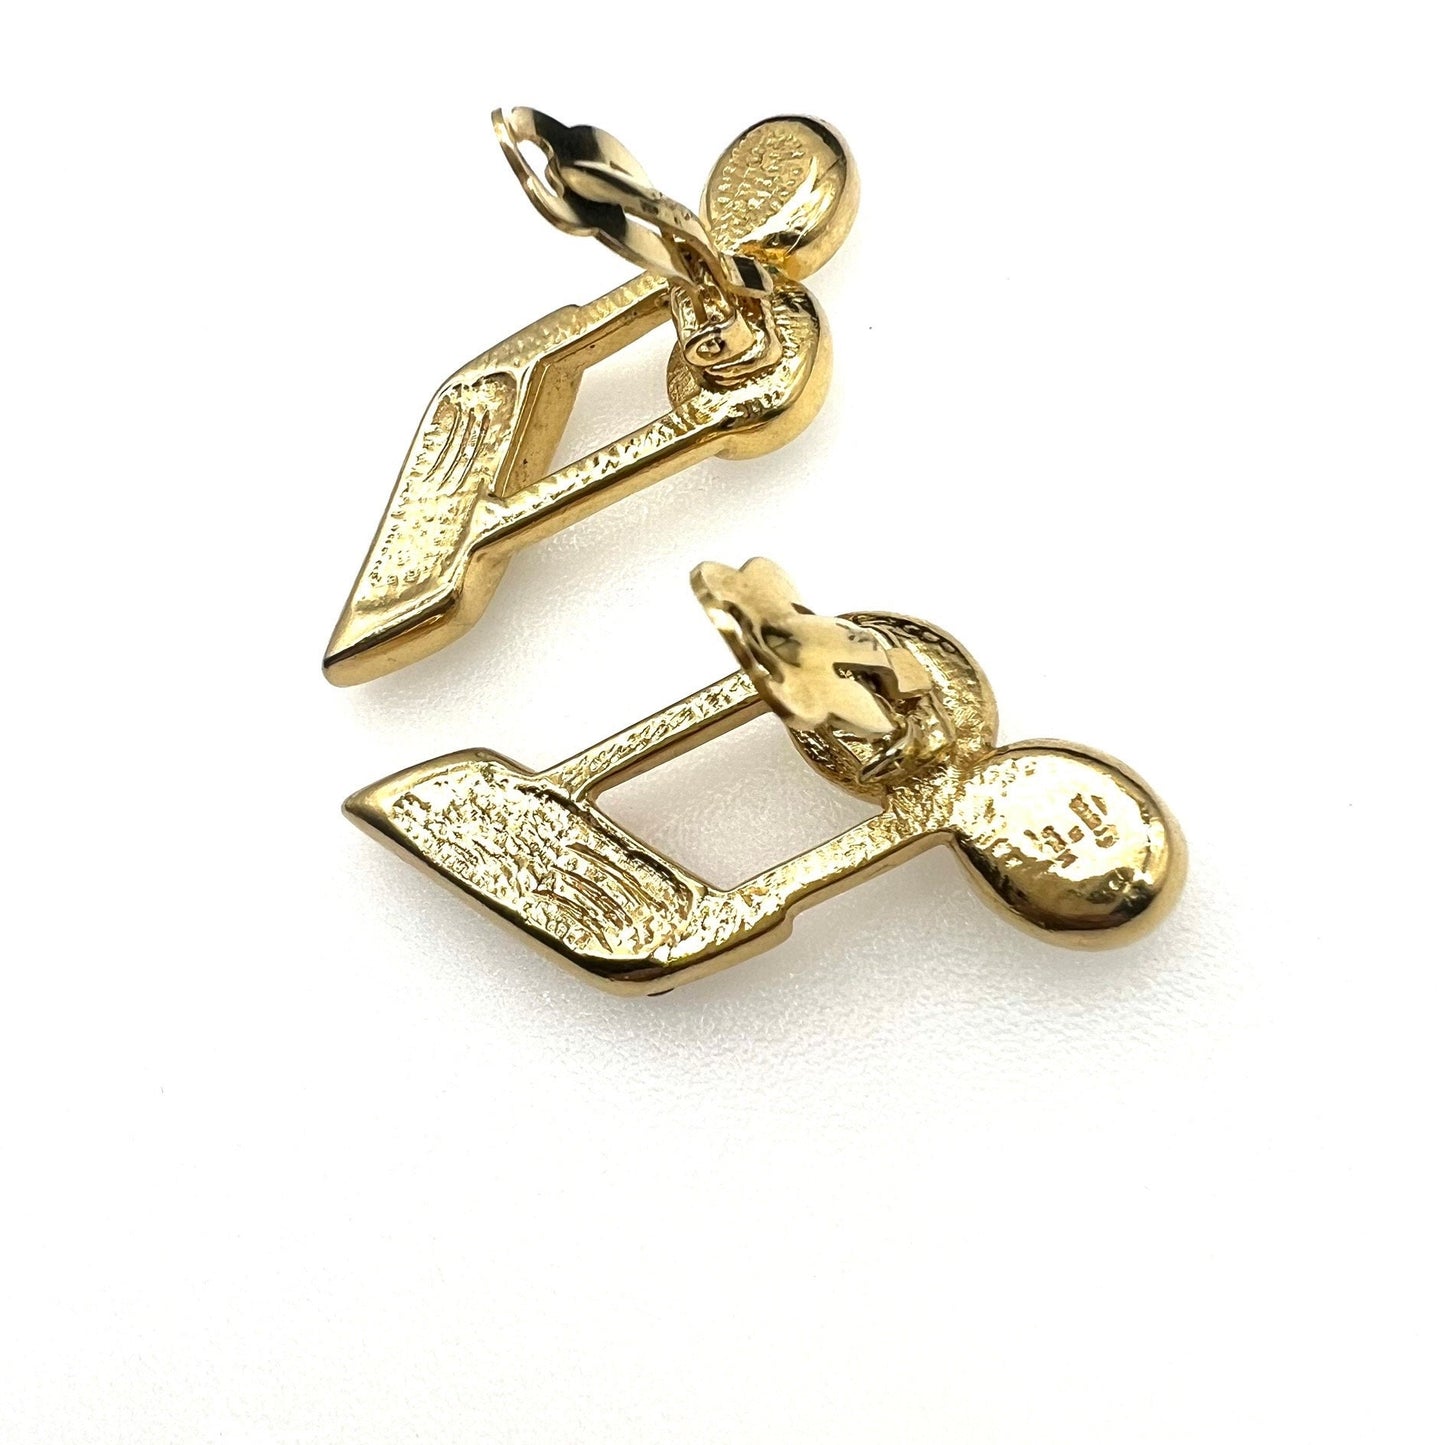 Large Yves Saint Laurent 1980's Robert Goossens Gold Plated and Crystal Semiquaver (Musical Note) Clip On Earrings in Original Box